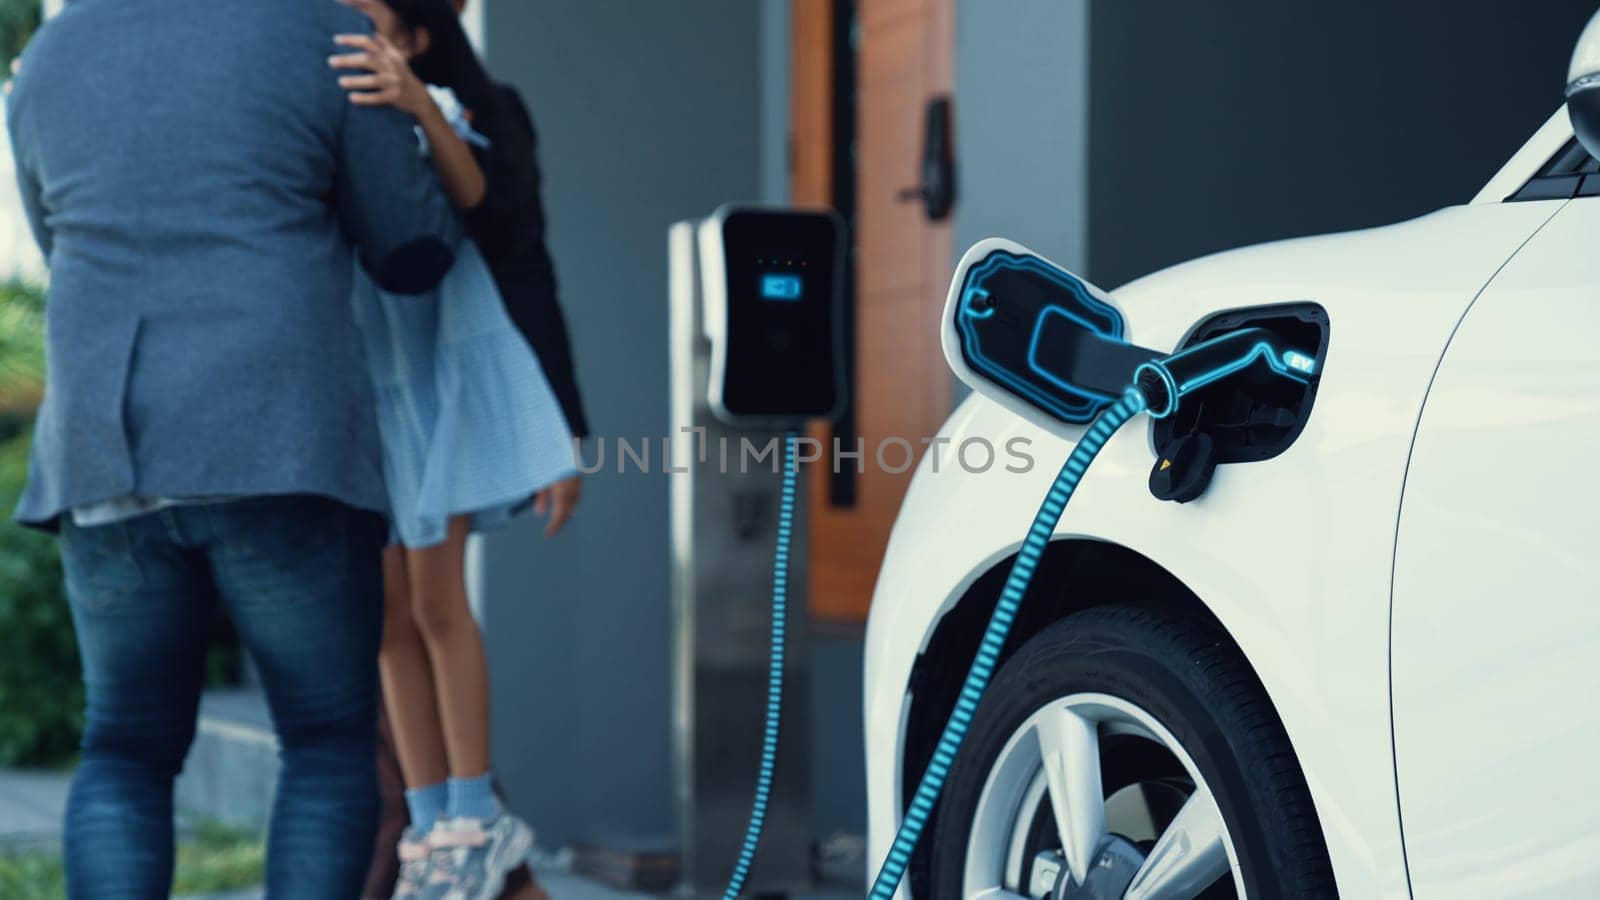 Modern family with young girl recharge electric car, EV charger from home charging station plugged in EV car in house garage. Smart and futuristic home energy infrastructure. Peruse